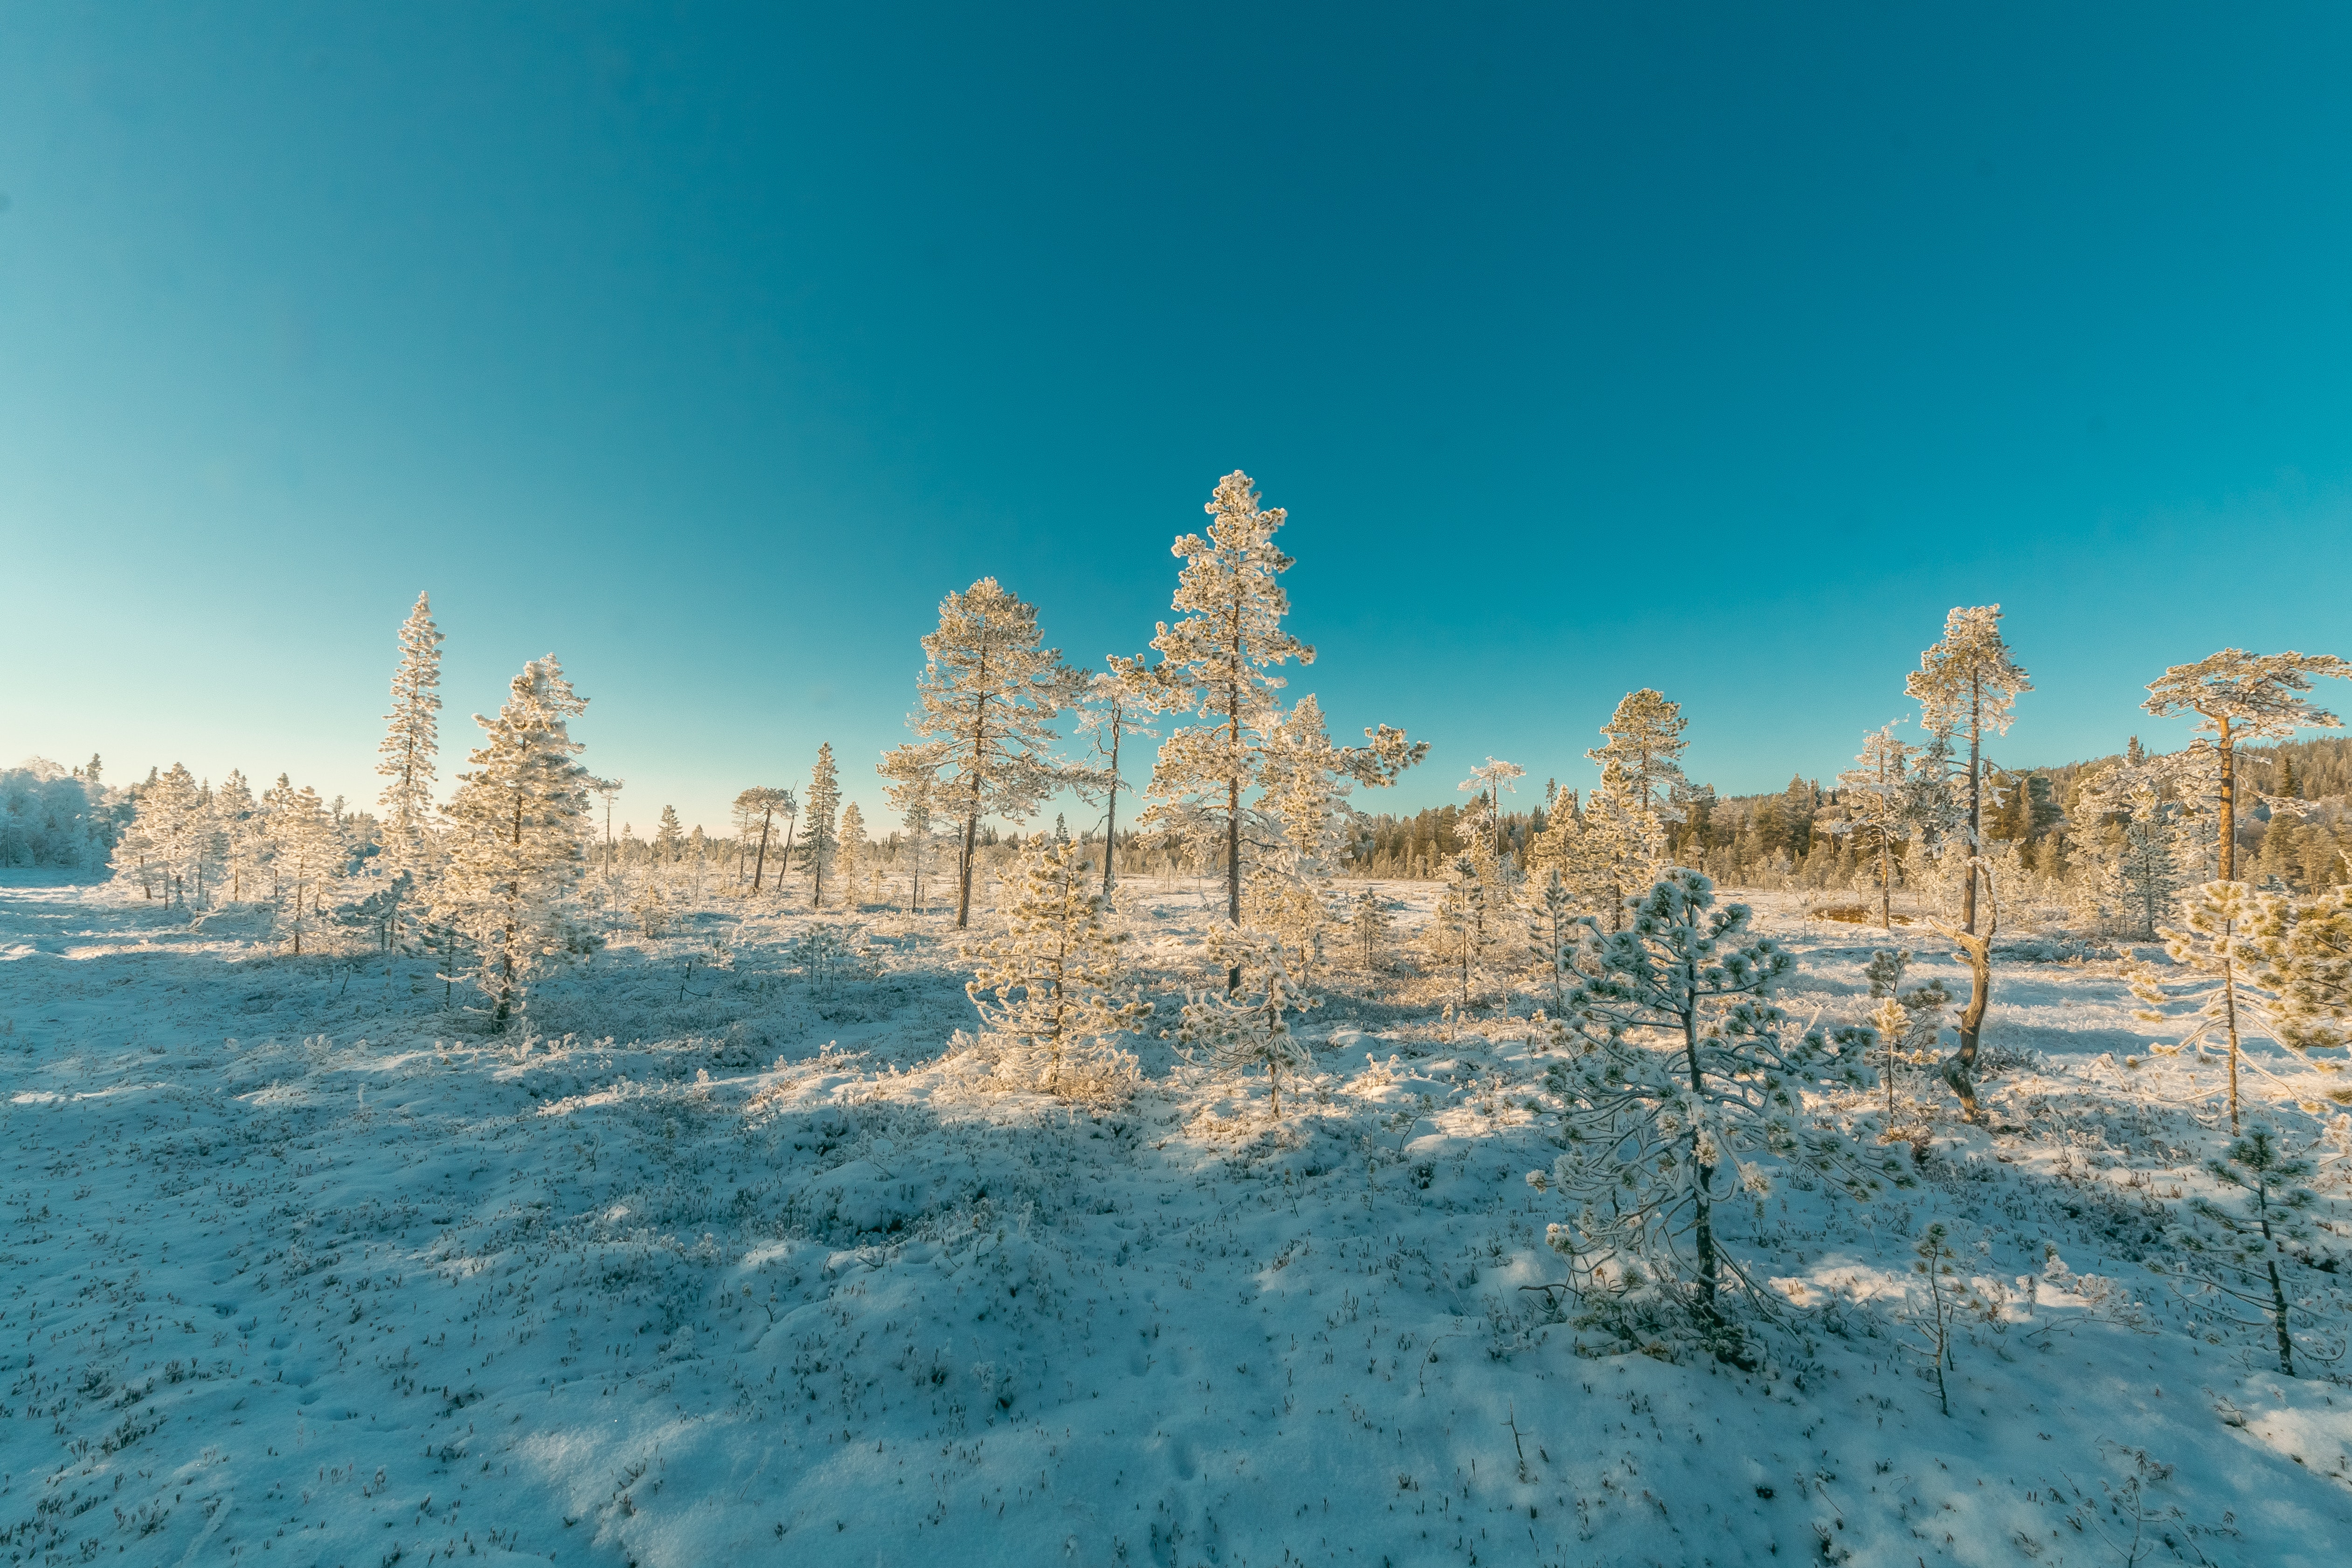 Free Photo Landscape Photography Of Snowy Forest Under Clear Sky Cold Scenic Winter Landscape Free Download Jooinn